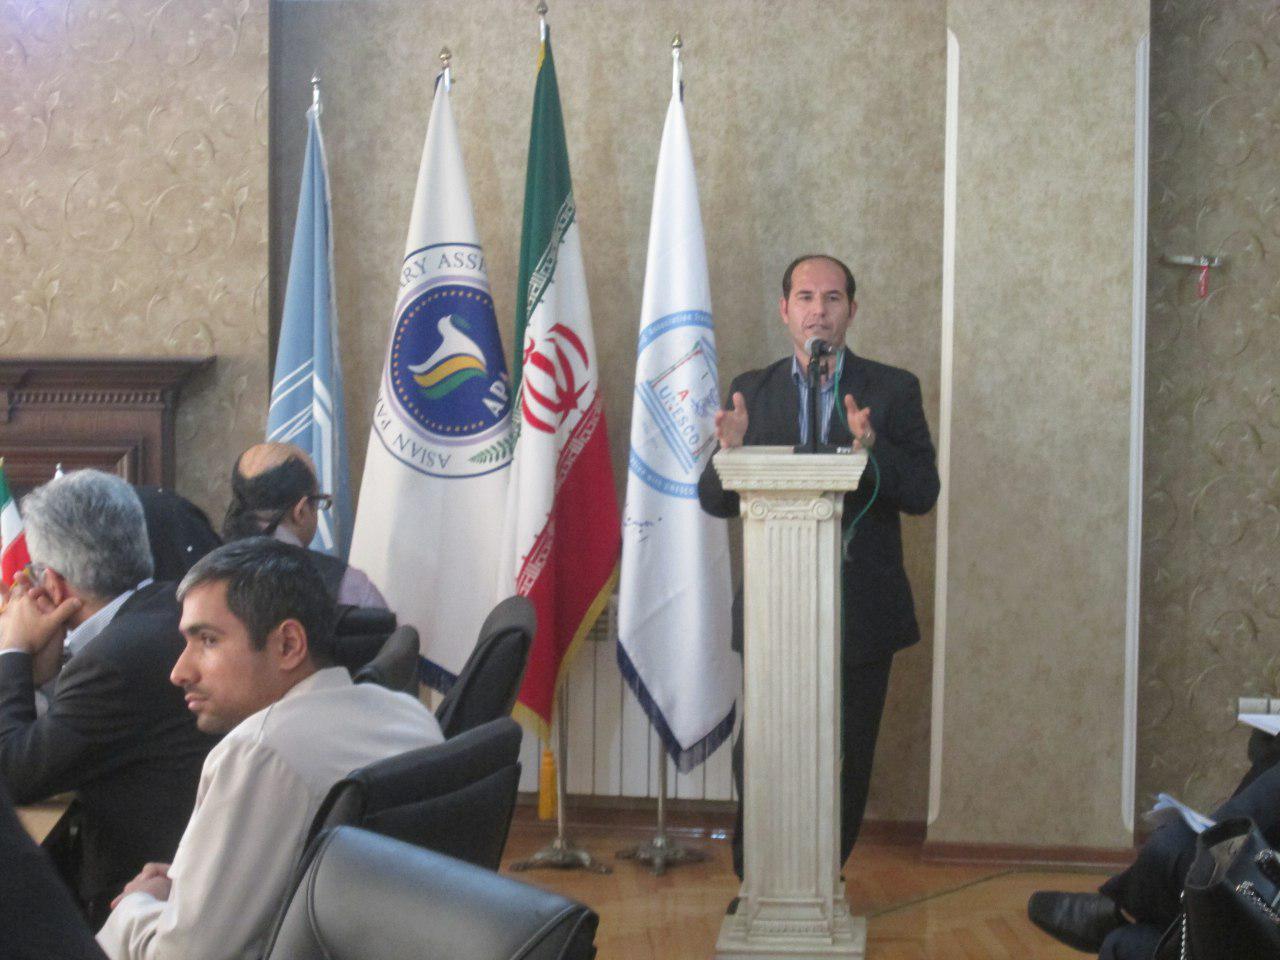 Dr. Veisi, consultant to the Department of Environment of I.R. Iran and Education Director of the Environment Faculty of Shahid Beheshti University, addresses the participants.